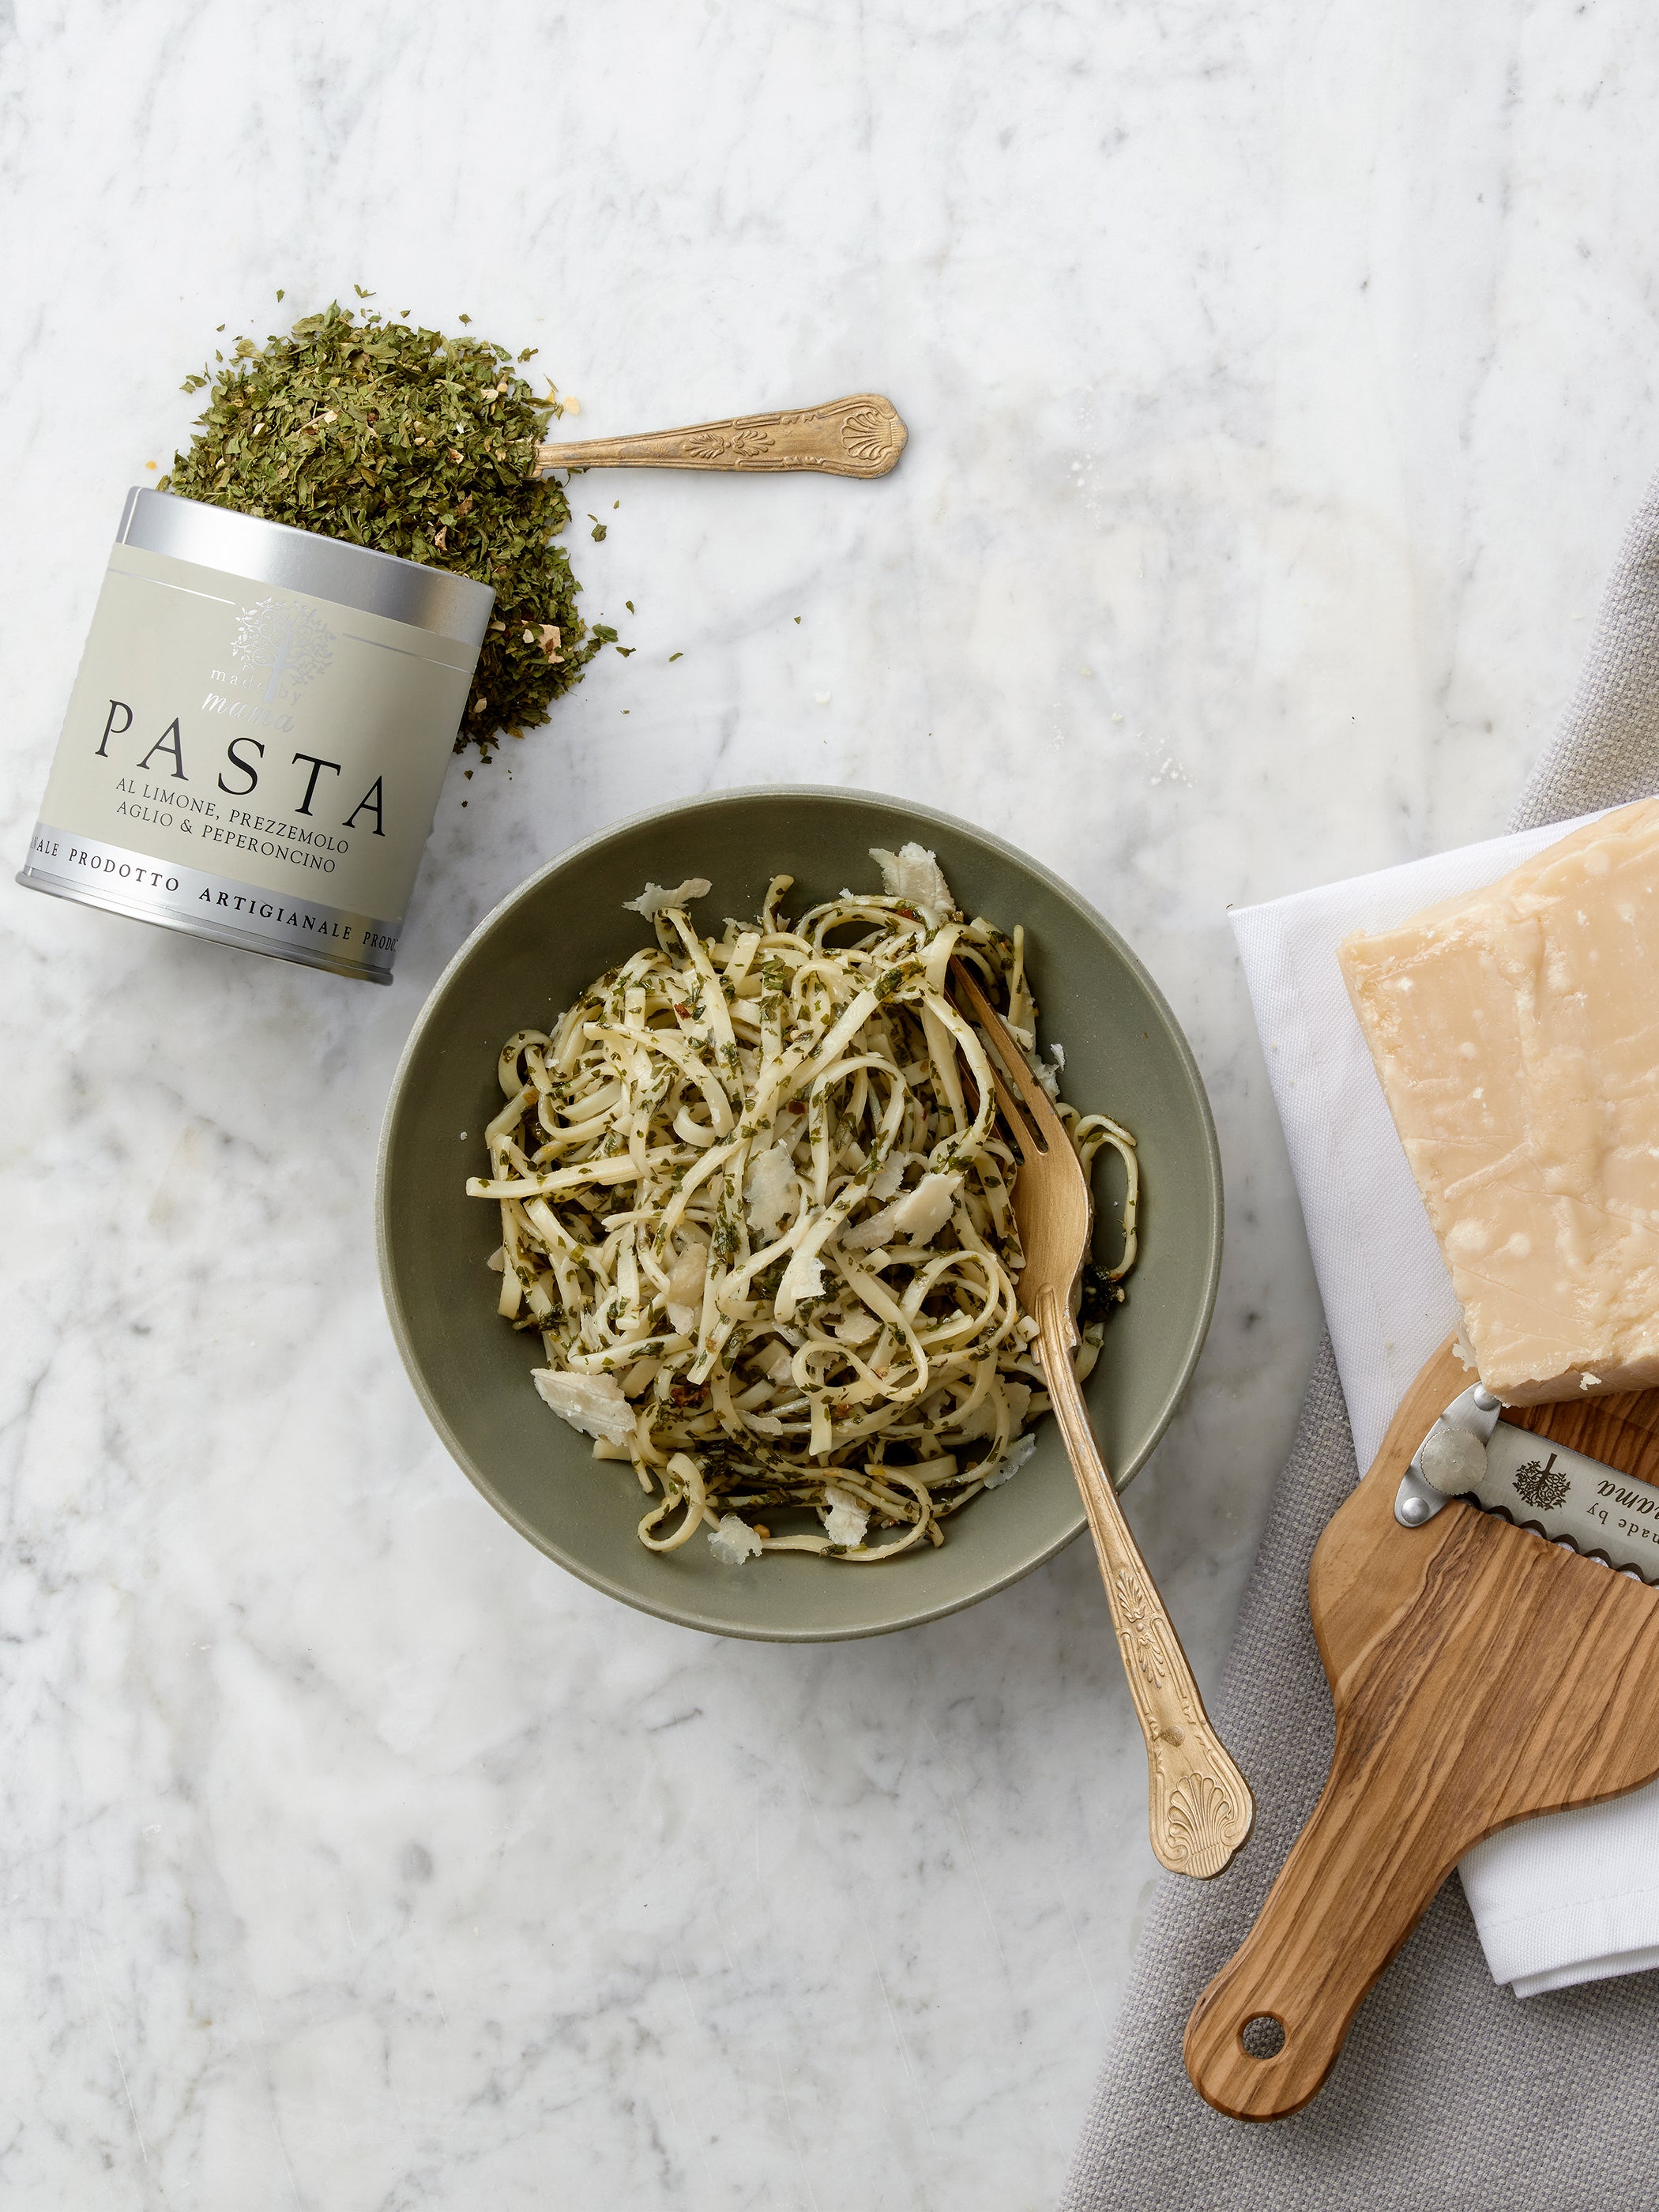 Shop Pasta Kits & Spices Online in the USA at Italian Food Online